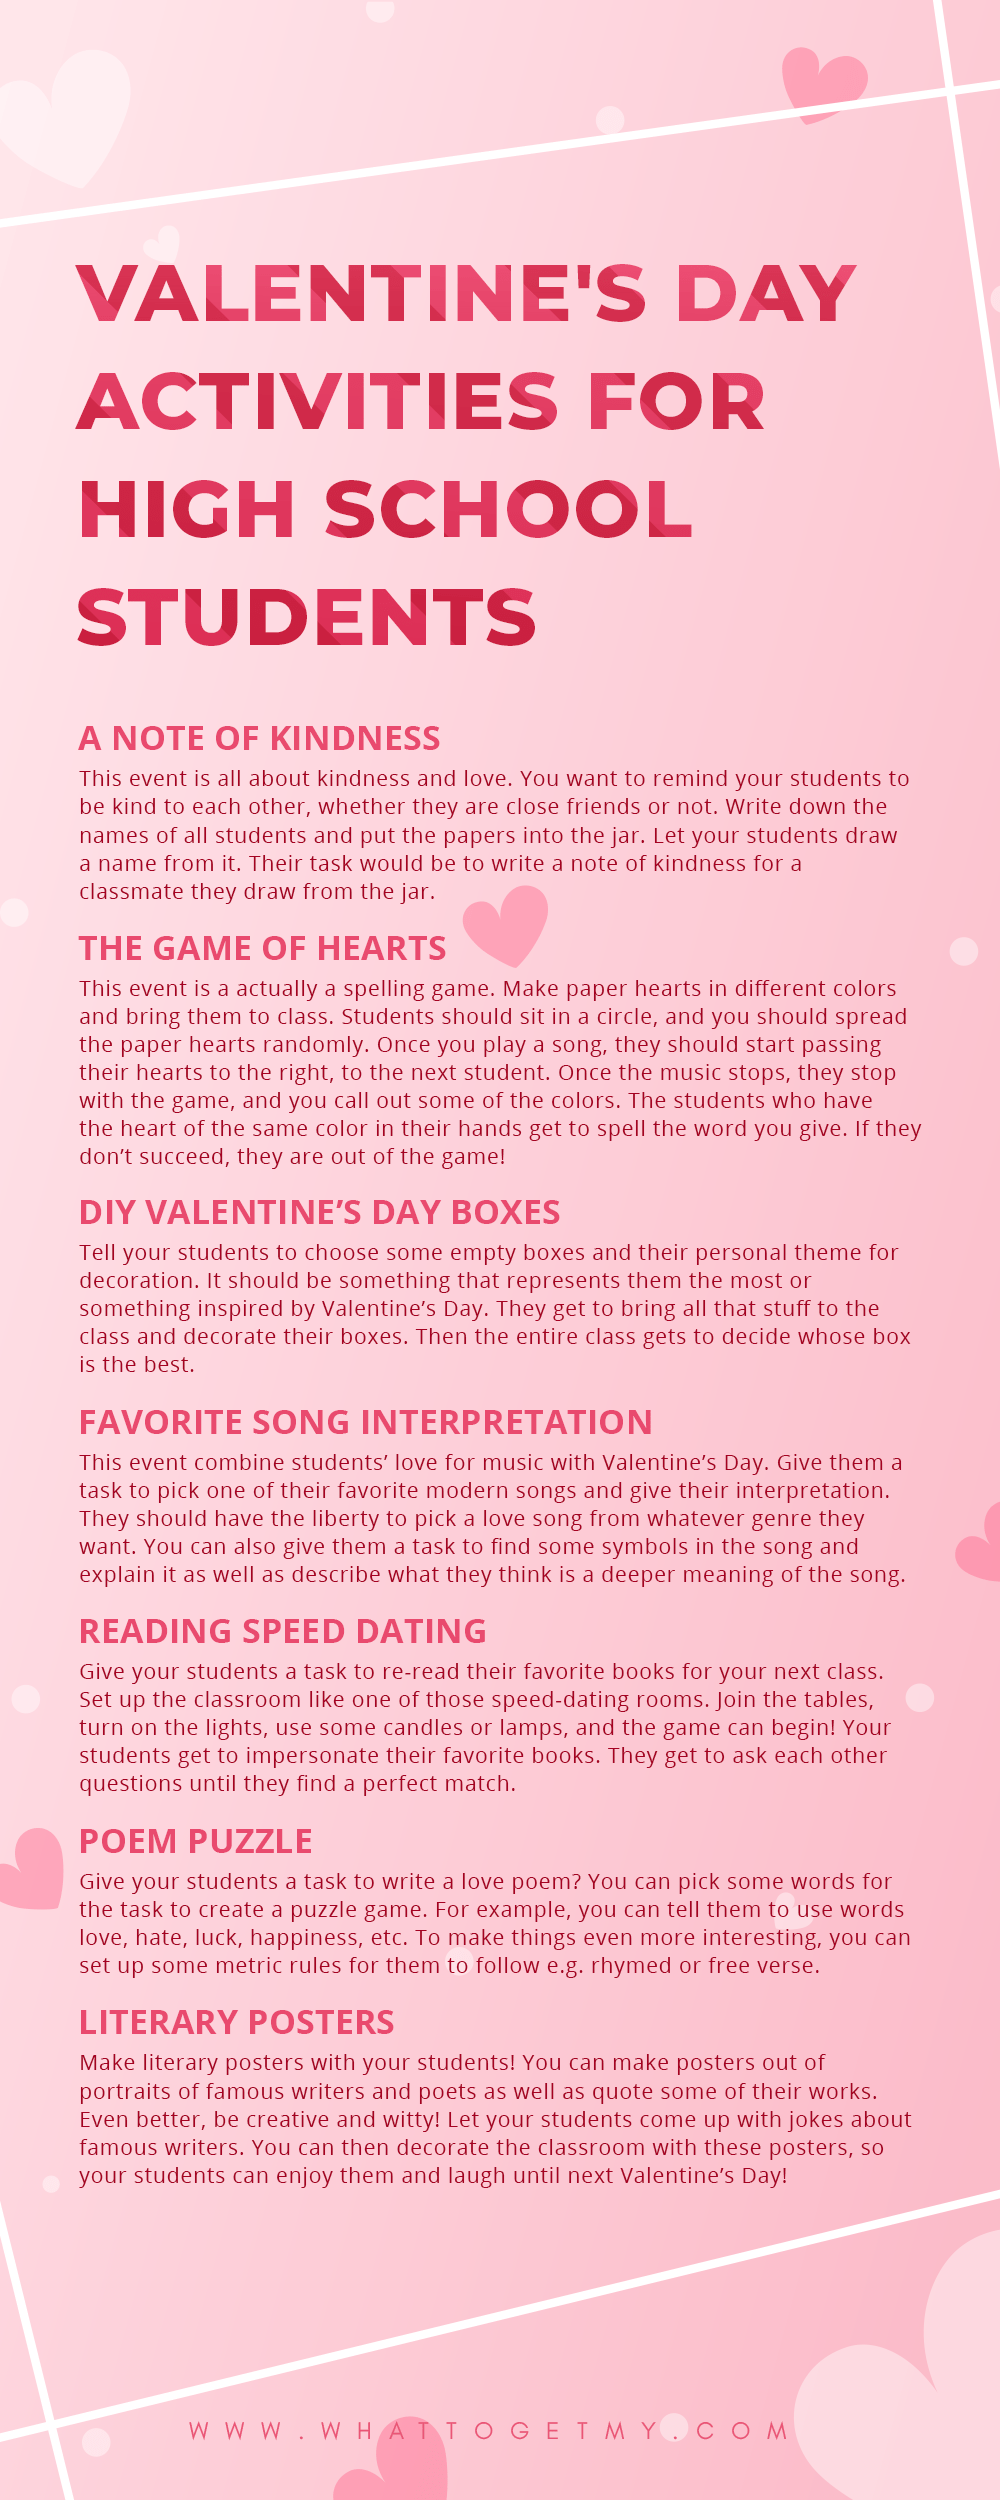 Infographic Valentine's Day Activities for High School Students